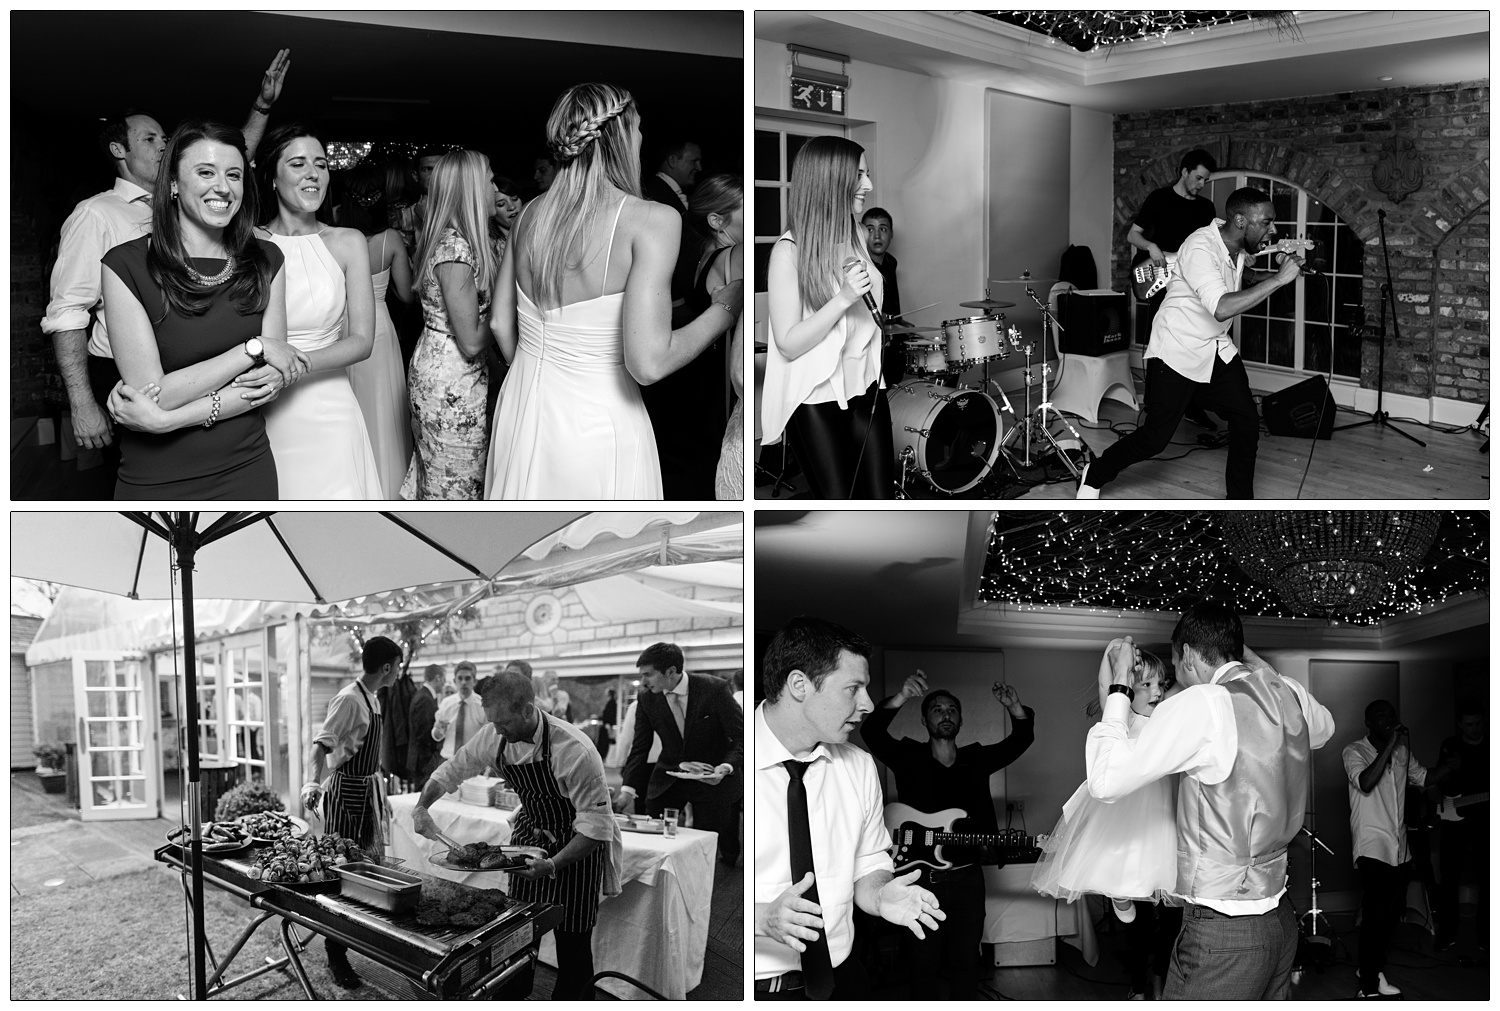 People dancing at a wedding reception whilst a chef cooks on the barbeque at Friern Manor